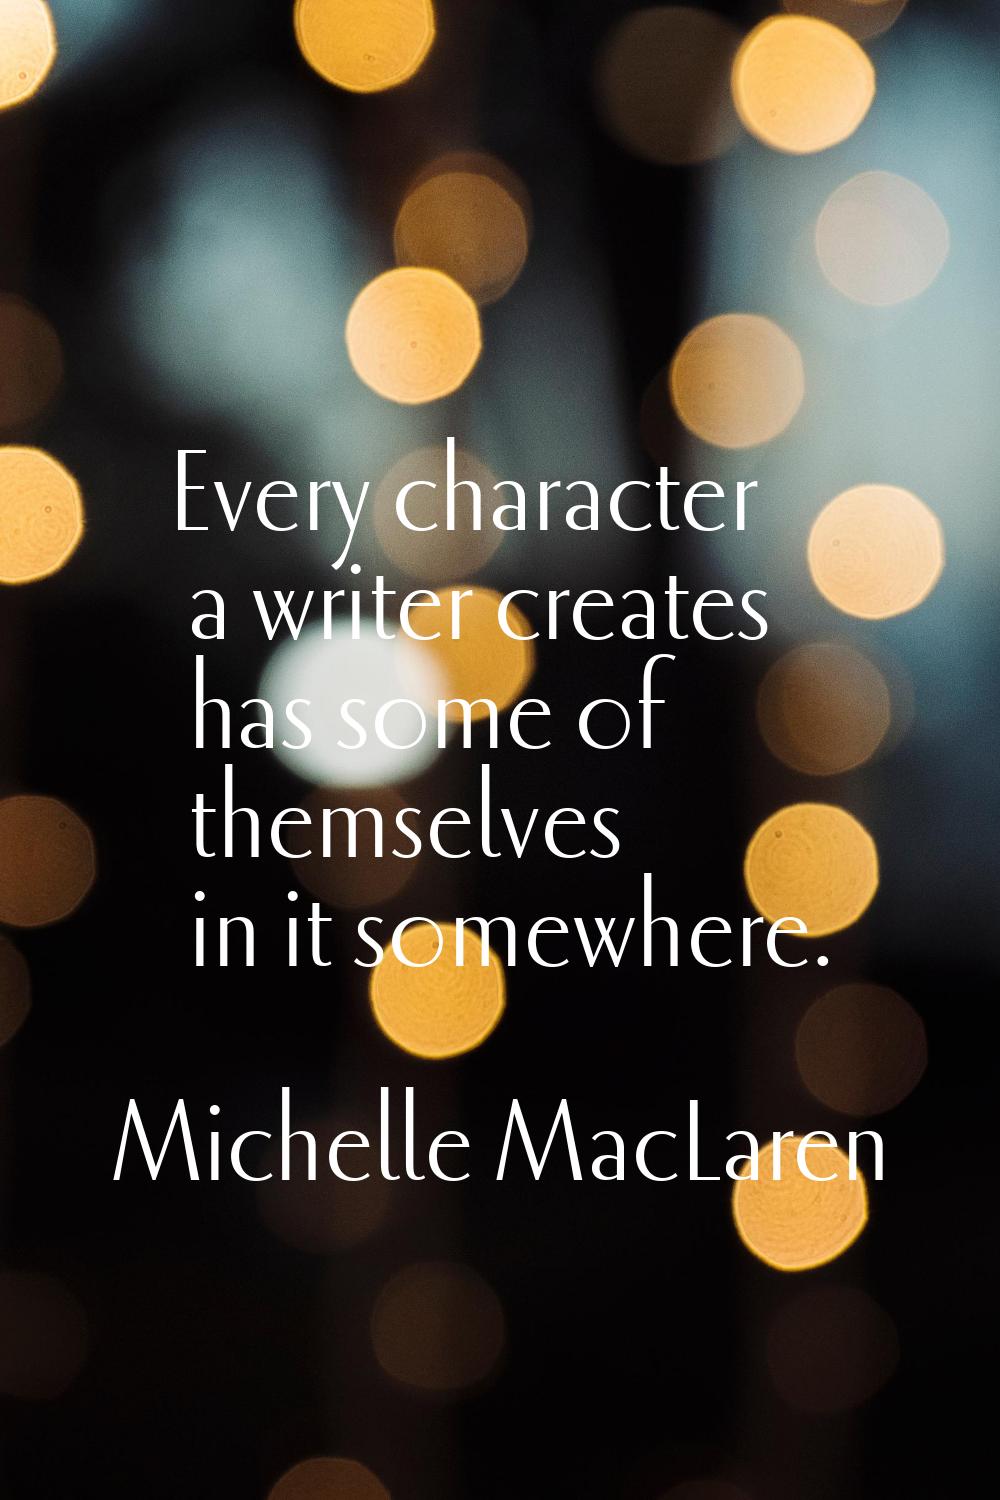 Every character a writer creates has some of themselves in it somewhere.